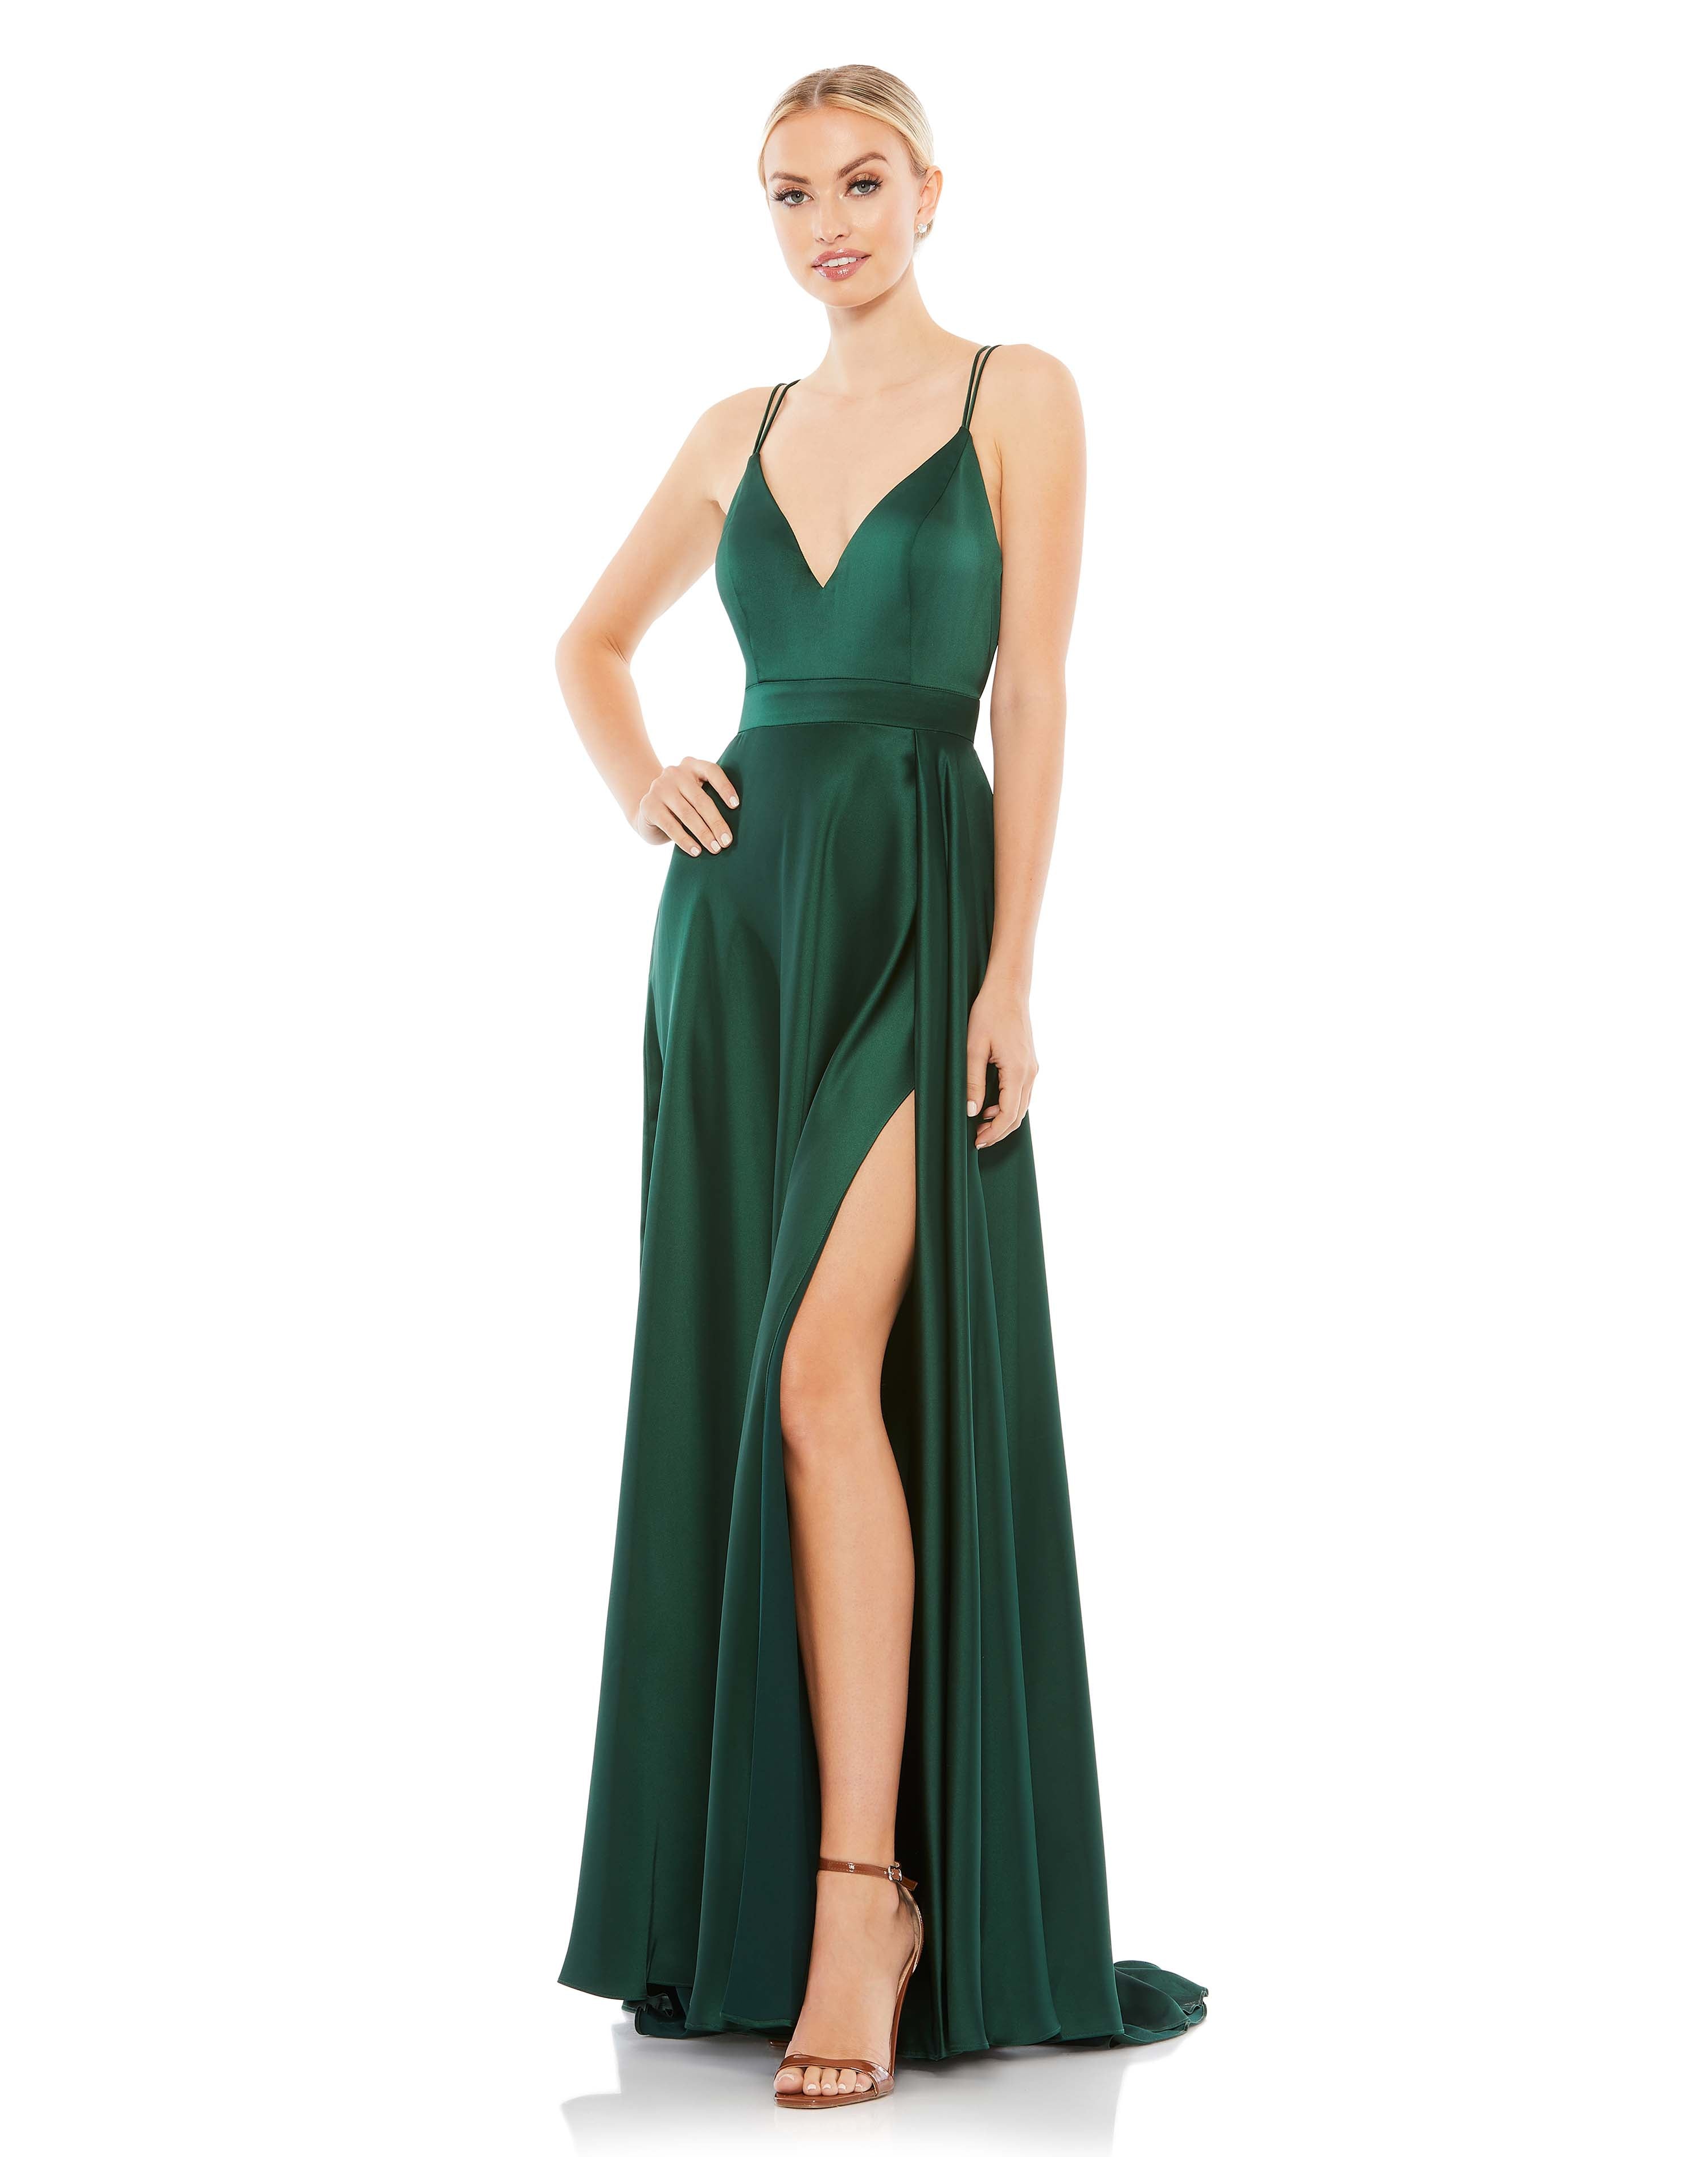 Satin Strappy-Back High Slit Gown